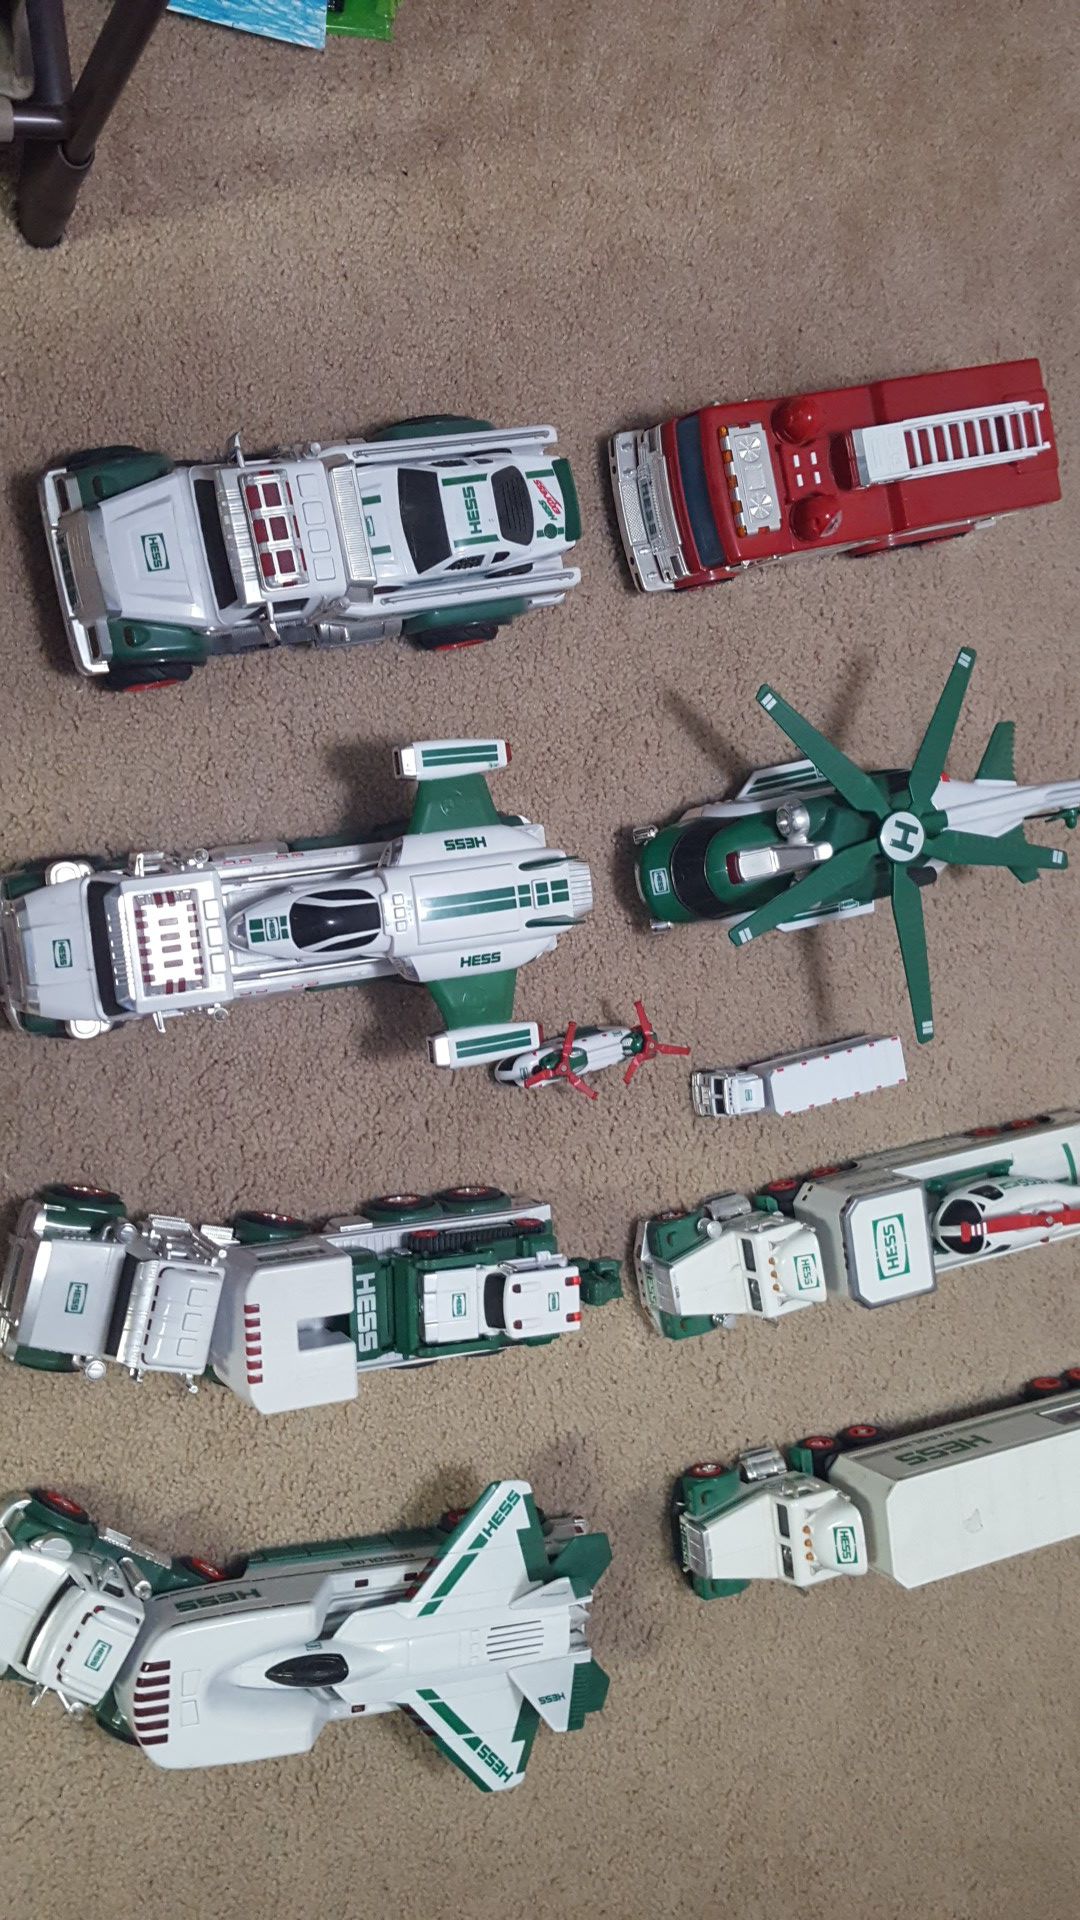 Hess truck collection.